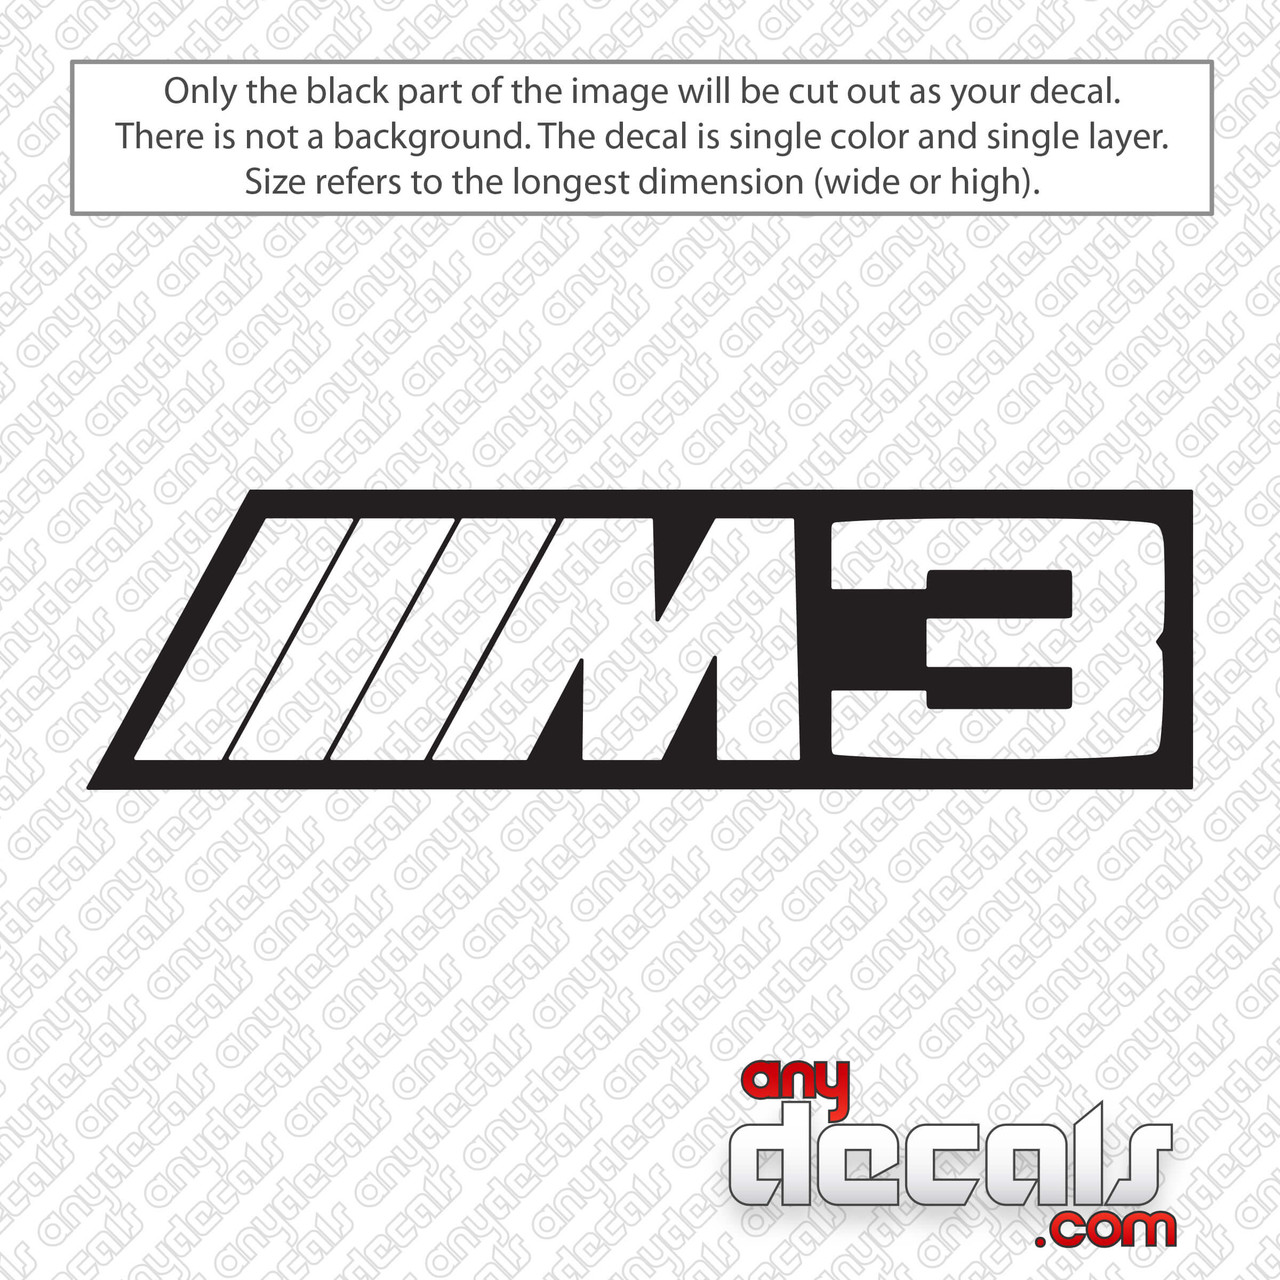 https://cdn11.bigcommerce.com/s-df97c/images/stencil/1280x1280/products/1389/2407/bmw-m3-logo-outline-decal-sticker__06190.1609385736.jpg?c=2?imbypass=on